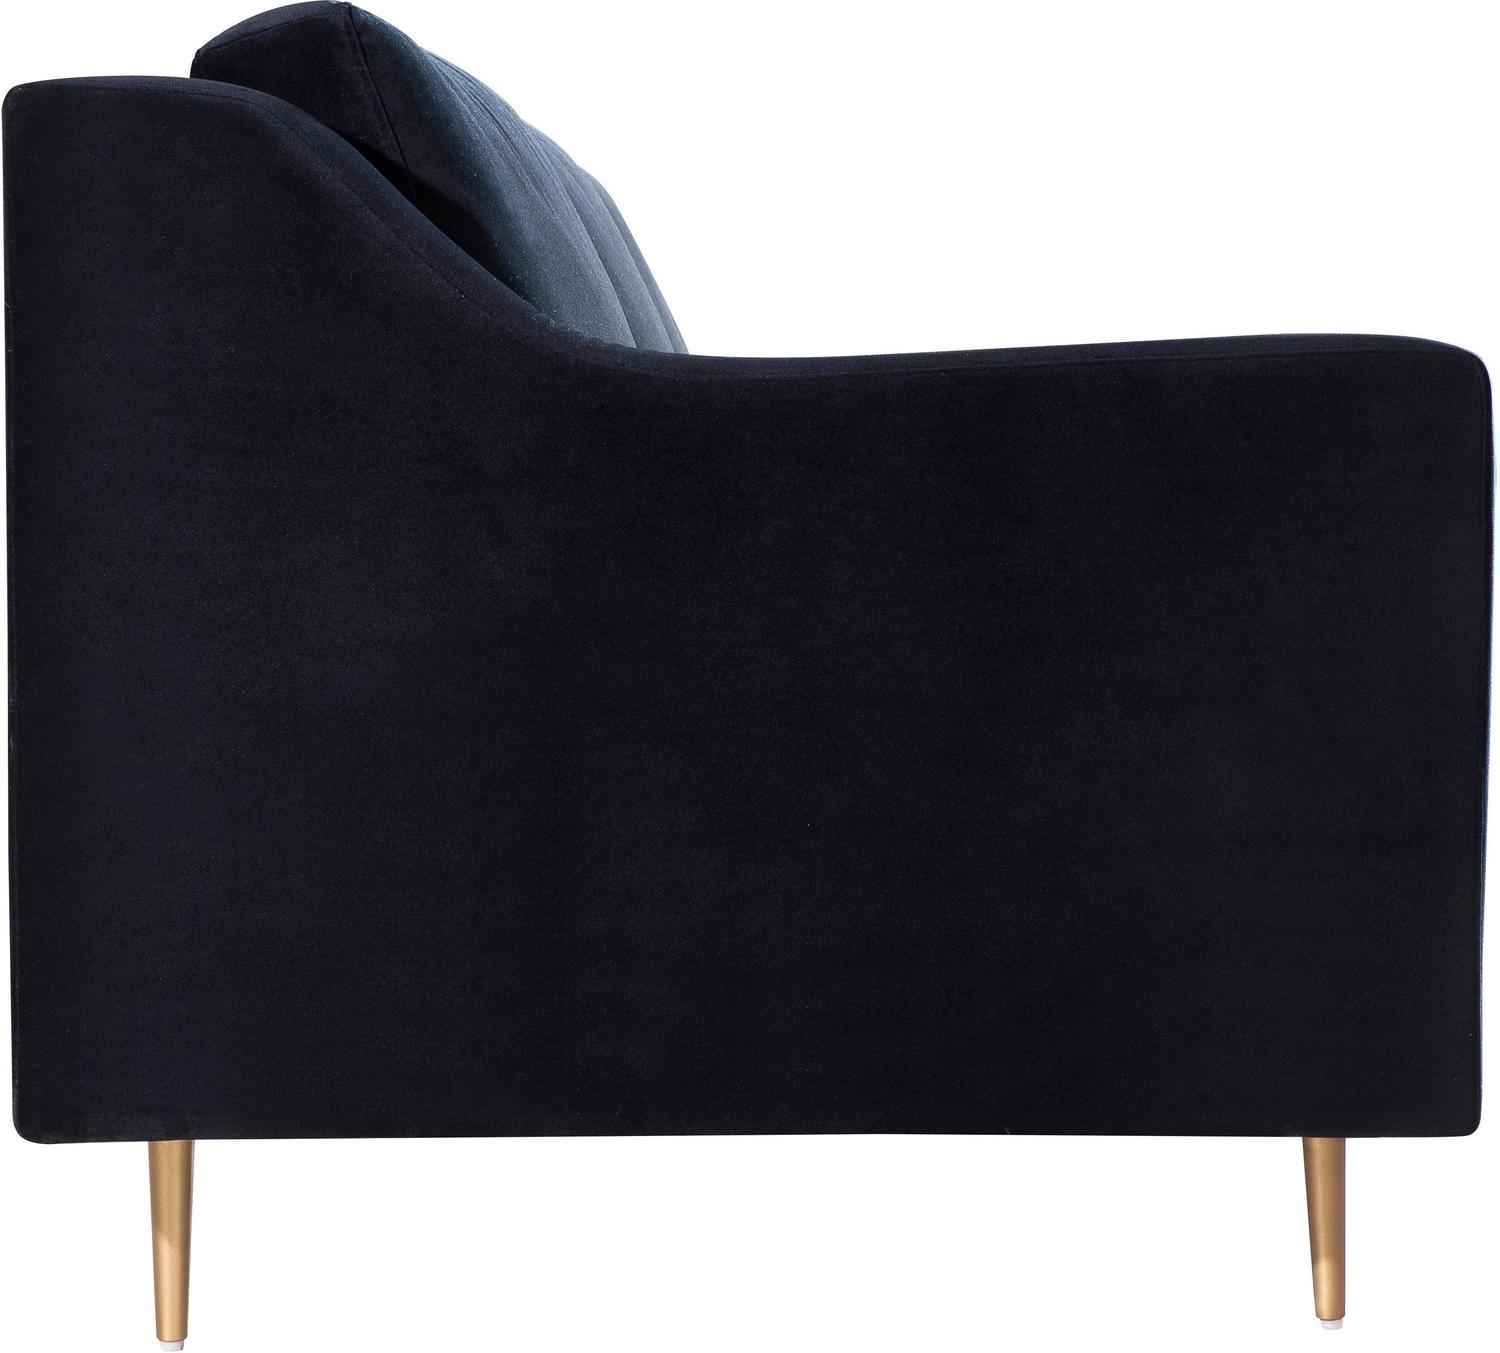 small couch with chaise Contemporary Design Furniture Sofas Black